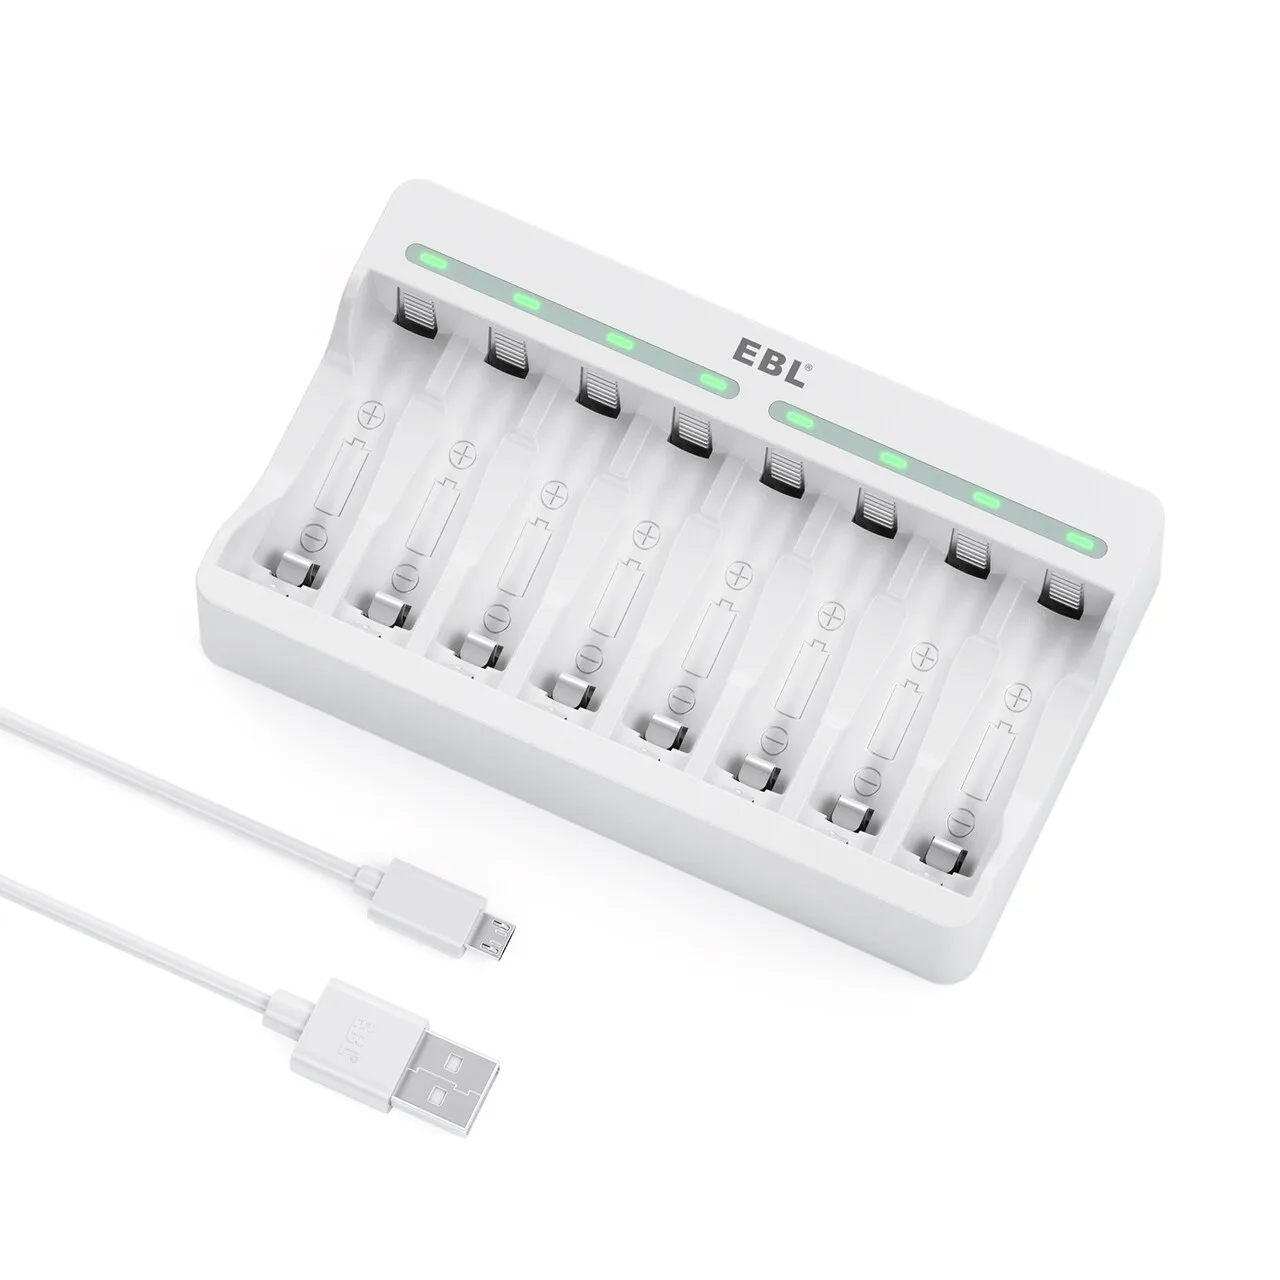 

EBL New 8slots individual Smart AA/AAA Battery Charger with 5V 2A Fast Charging for Rechargeable Batteries, White